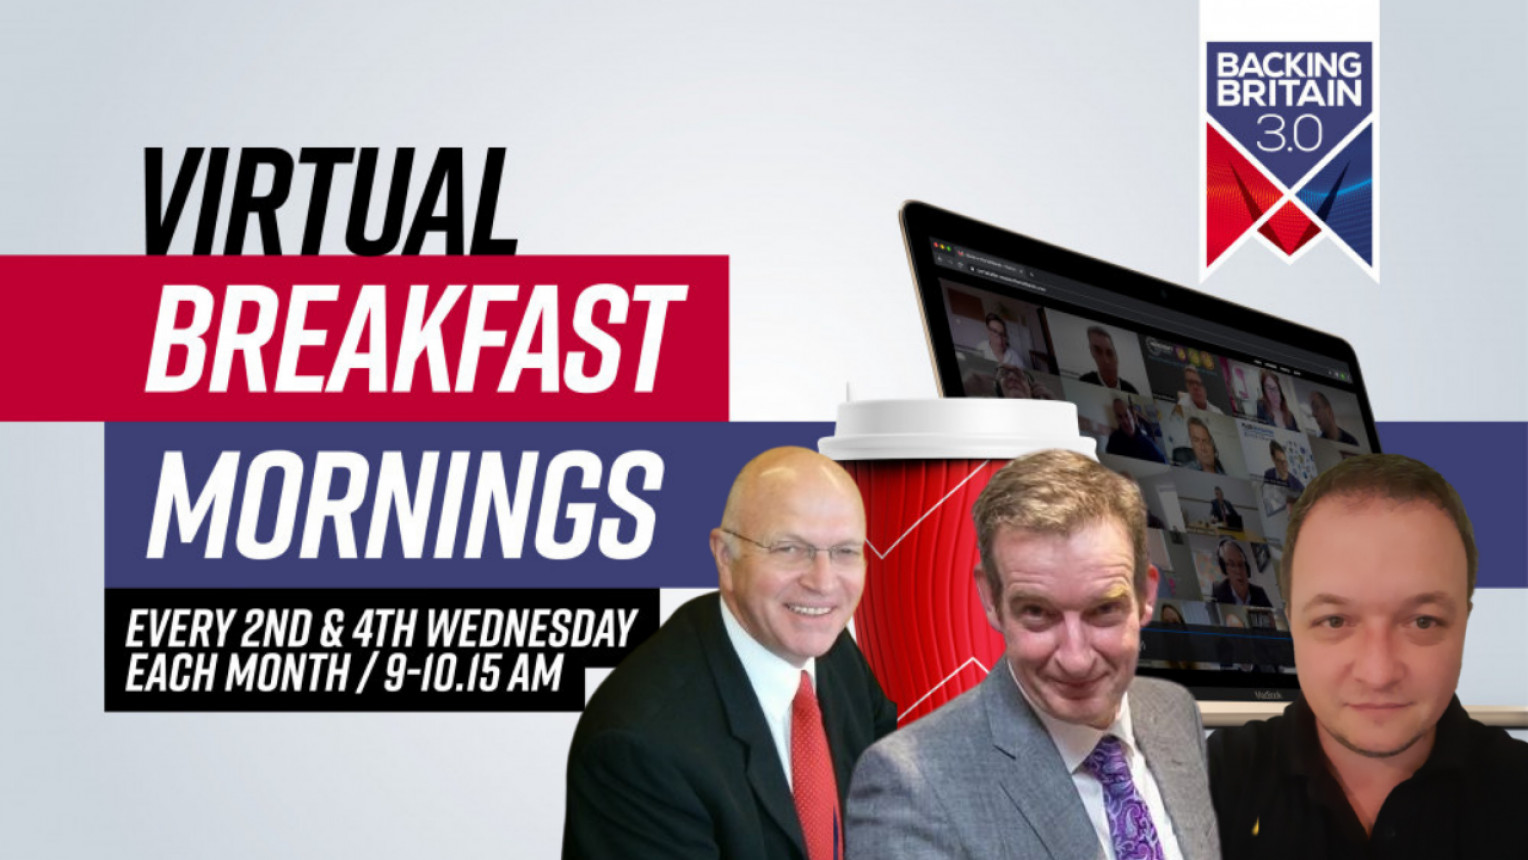 Backing Britain Virtual Breakfast Mornings with the Ace Group, WH Tildesley and Malthouse Engineering